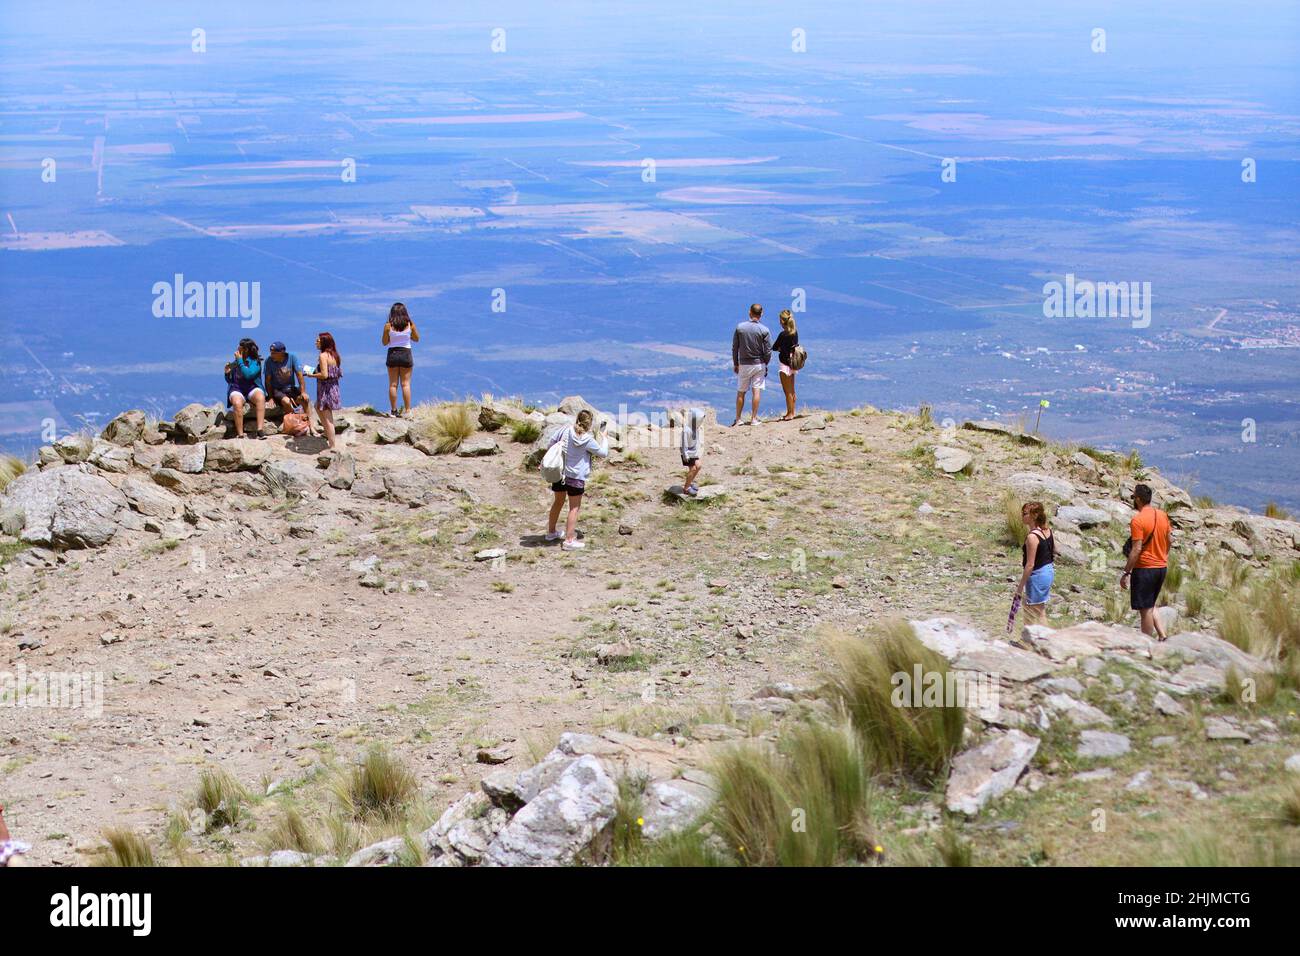 SAN LUIS, 25.01.2022: Tourists have fun in the different attractions offered by the large mountains in Merlo, San Luis, Argentina Stock Photo